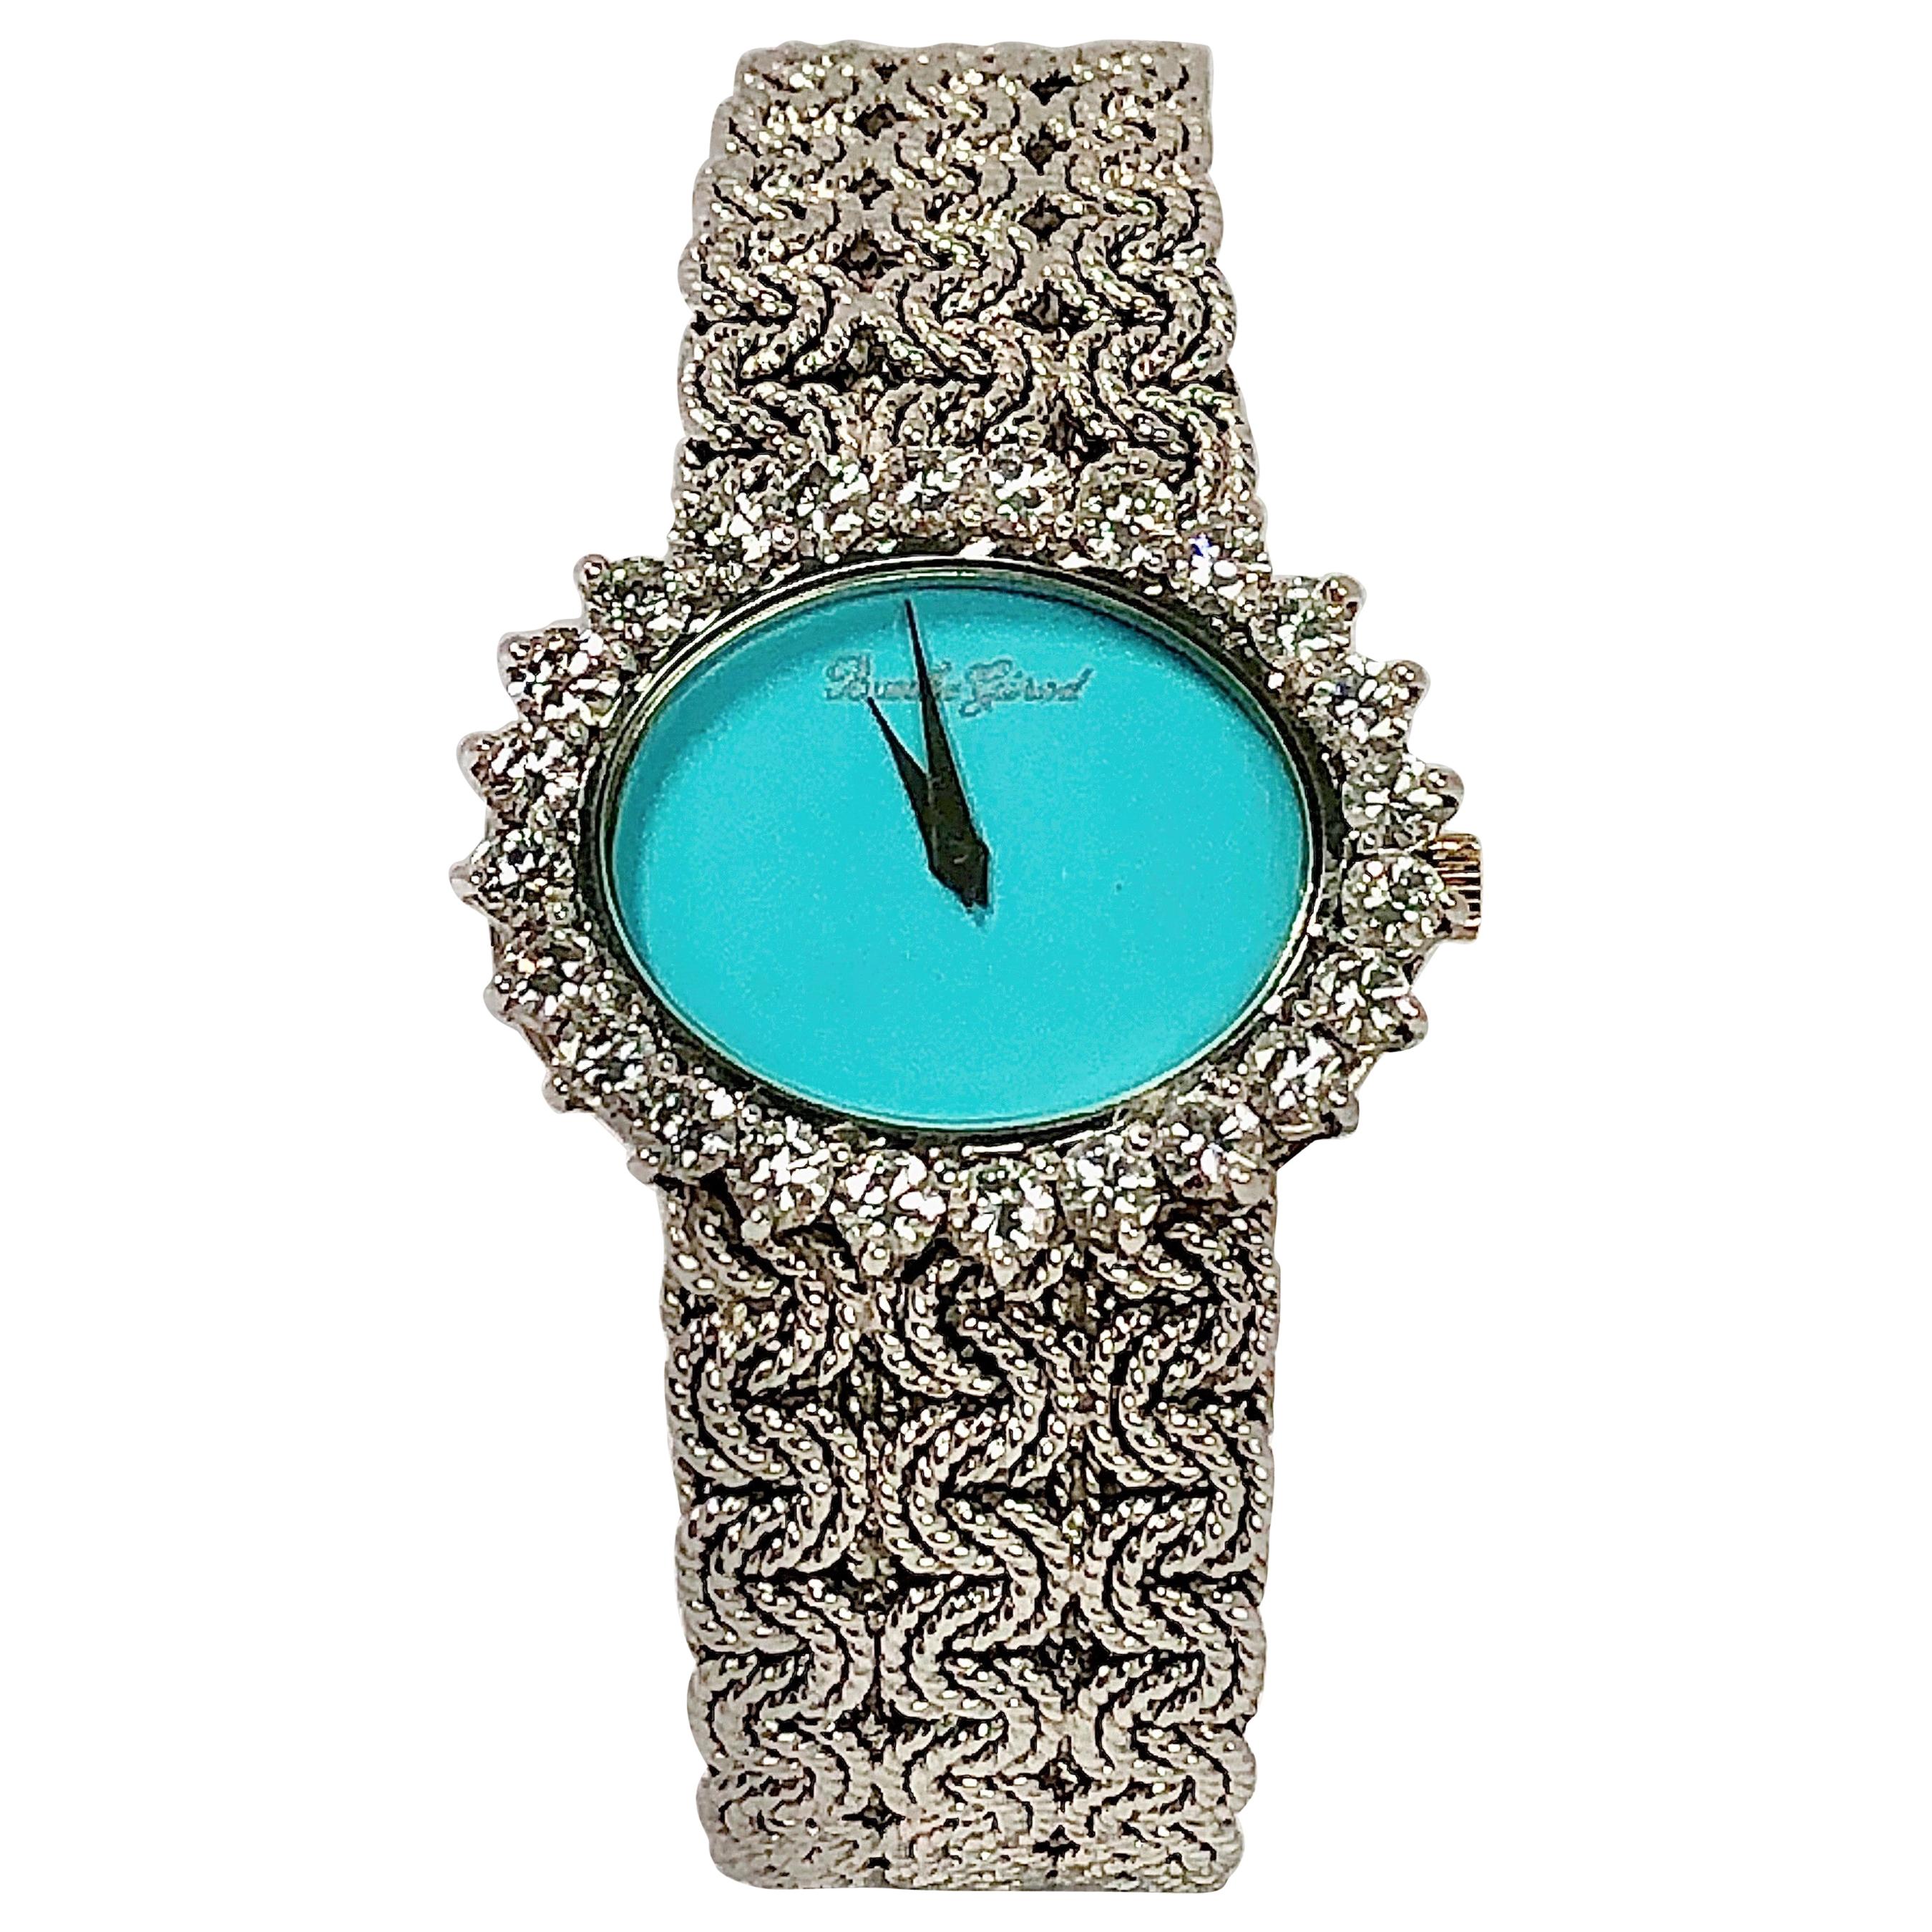 White Gold Ladies Bueche Girod Watch with Turquoise Dial and Large Diamond Bezel